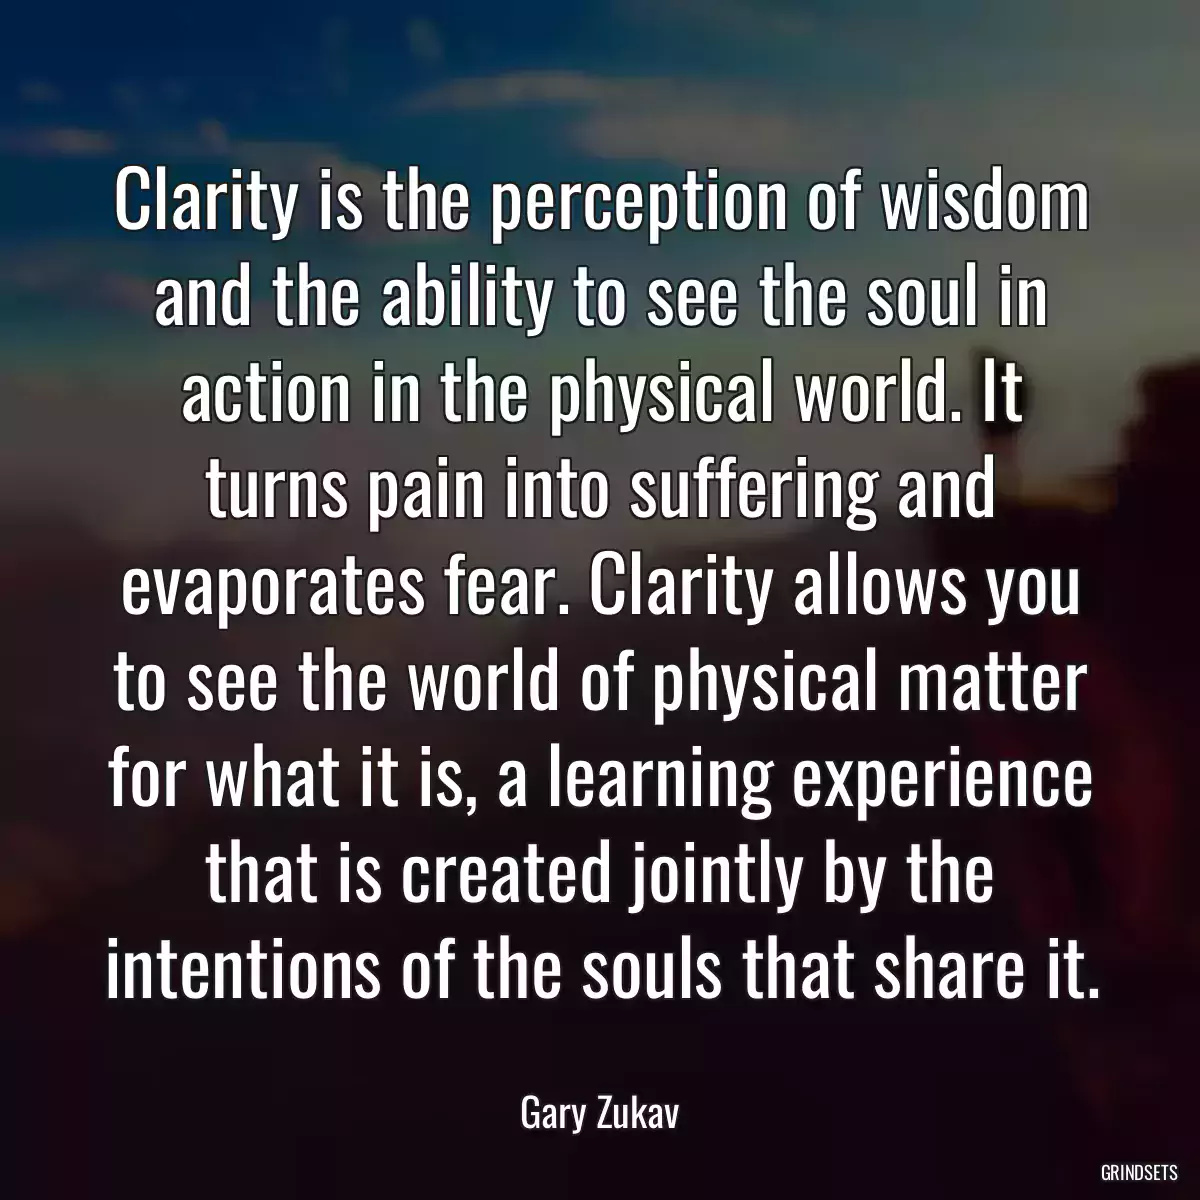 Clarity is the perception of wisdom and the ability to see the soul in action in the physical world. It turns pain into suffering and evaporates fear. Clarity allows you to see the world of physical matter for what it is, a learning experience that is created jointly by the intentions of the souls that share it.